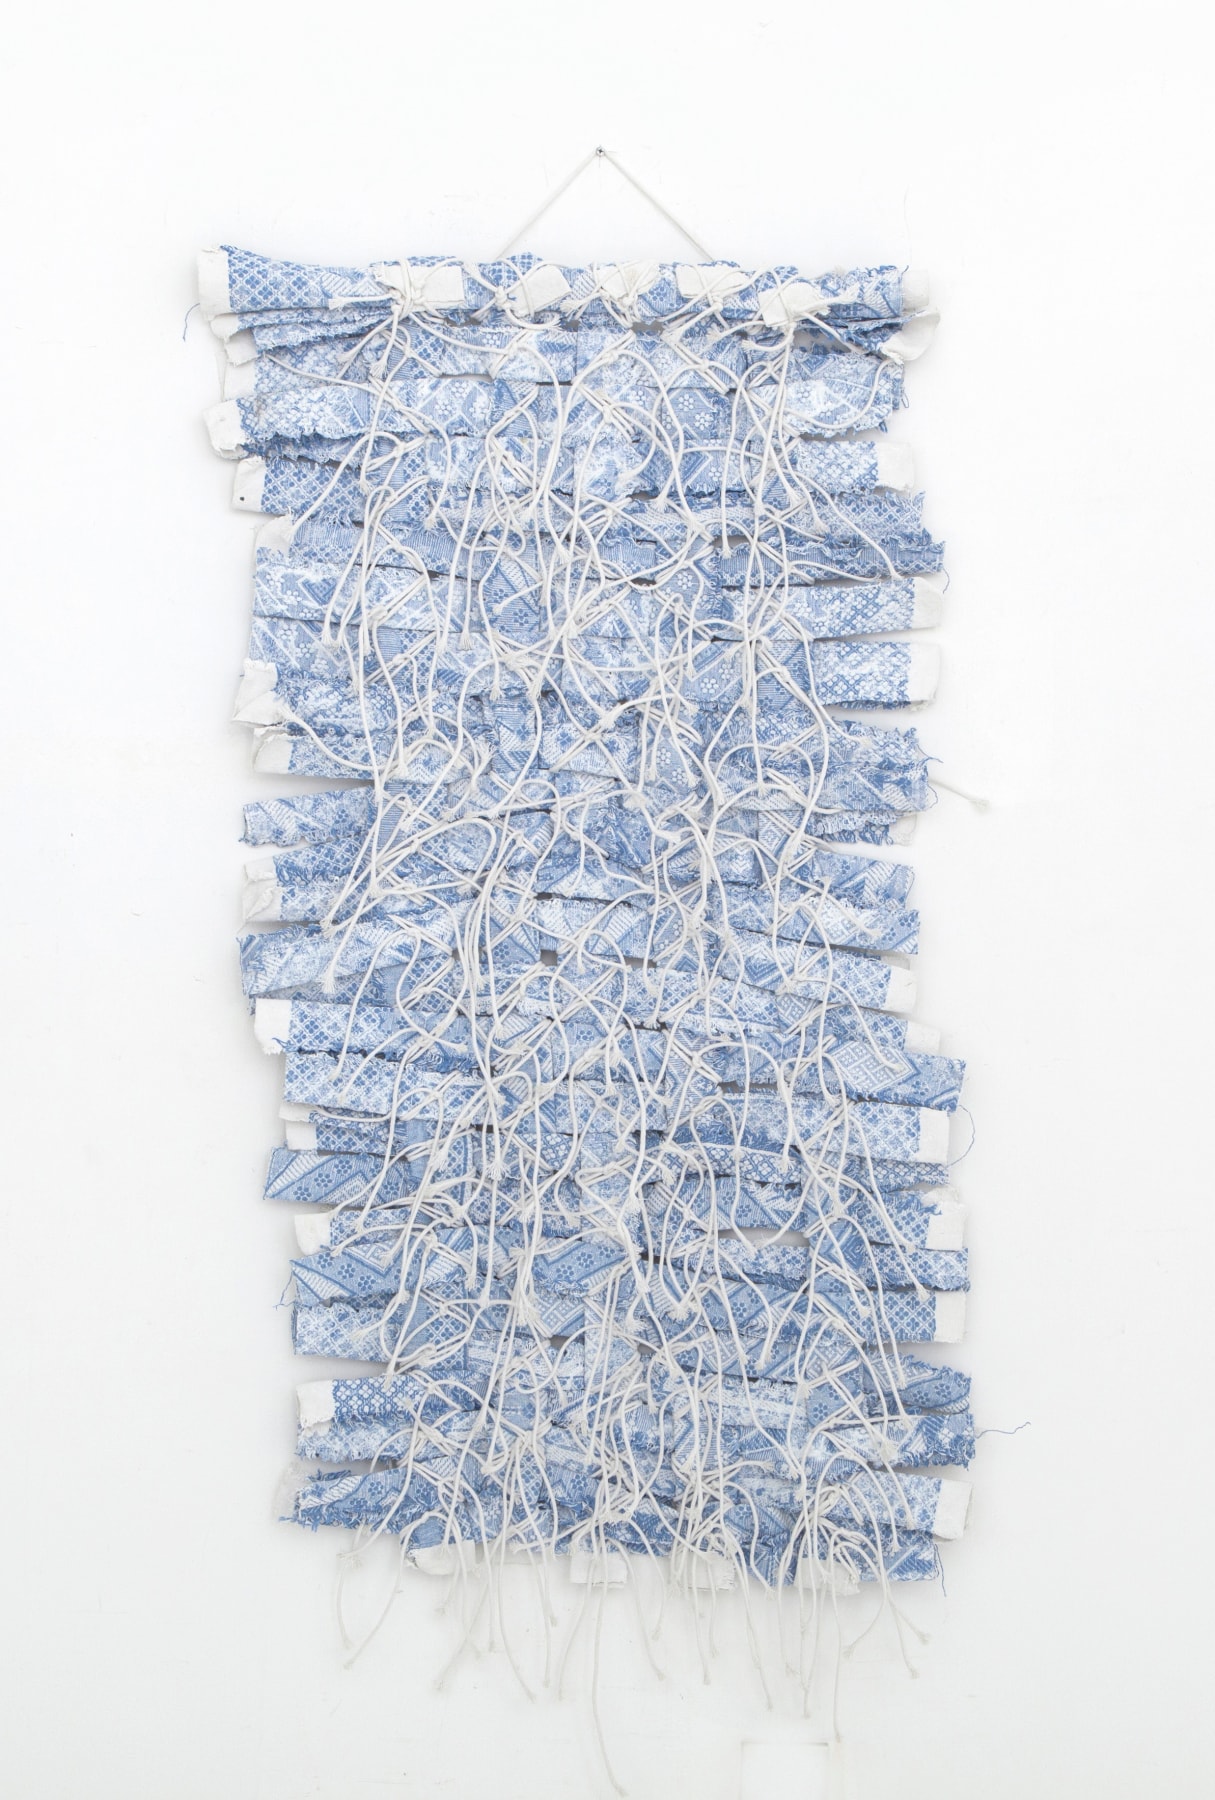 Hassan Sharif, Rug, Cotton Rope, and Glue, 2013